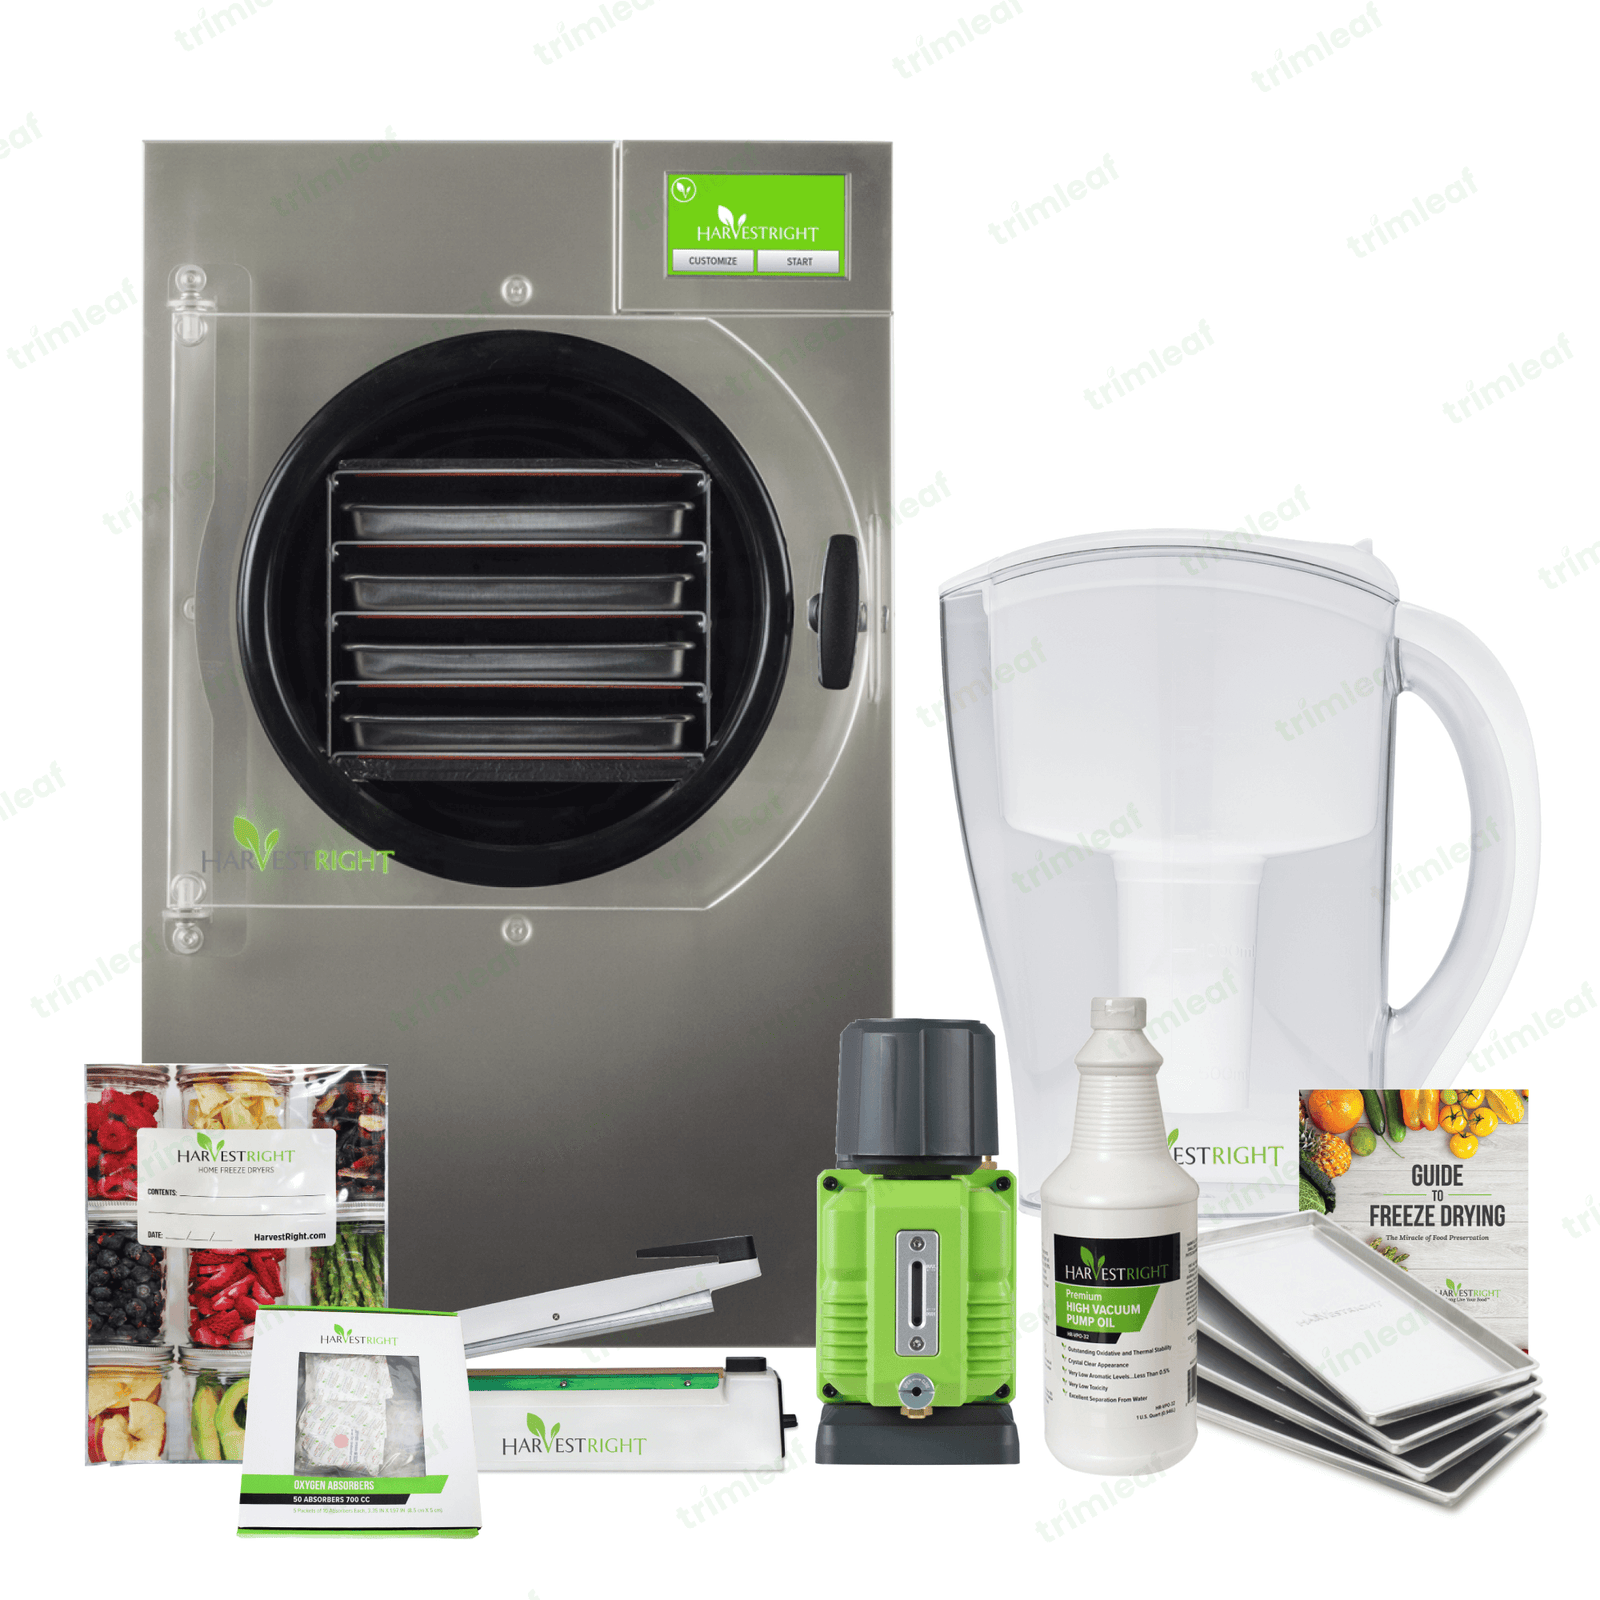 https://cdn.shopify.com/s/files/1/1383/1731/files/harvest-right-premier-pump-harvest-right-4-tray-small-pro-stainless-steel-home-freeze-dryer-w-mylar-kit-39888096592088_1600x.png?v=1699311466